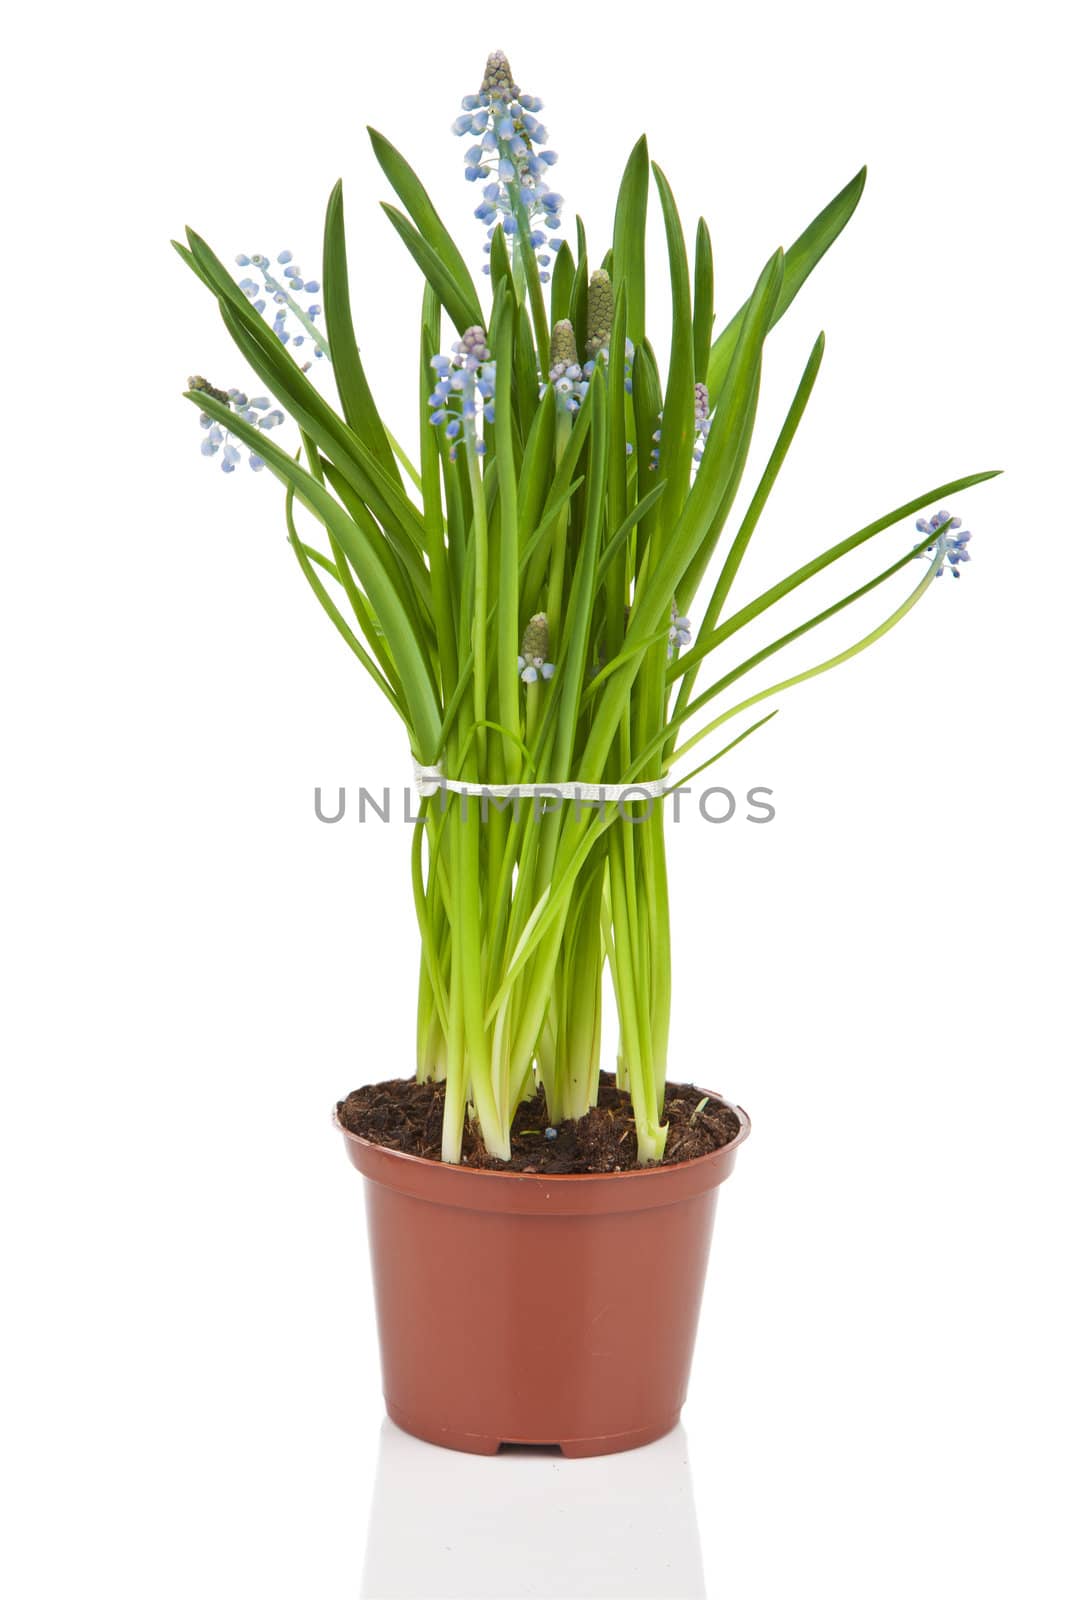 muscari flowers in pot isolated